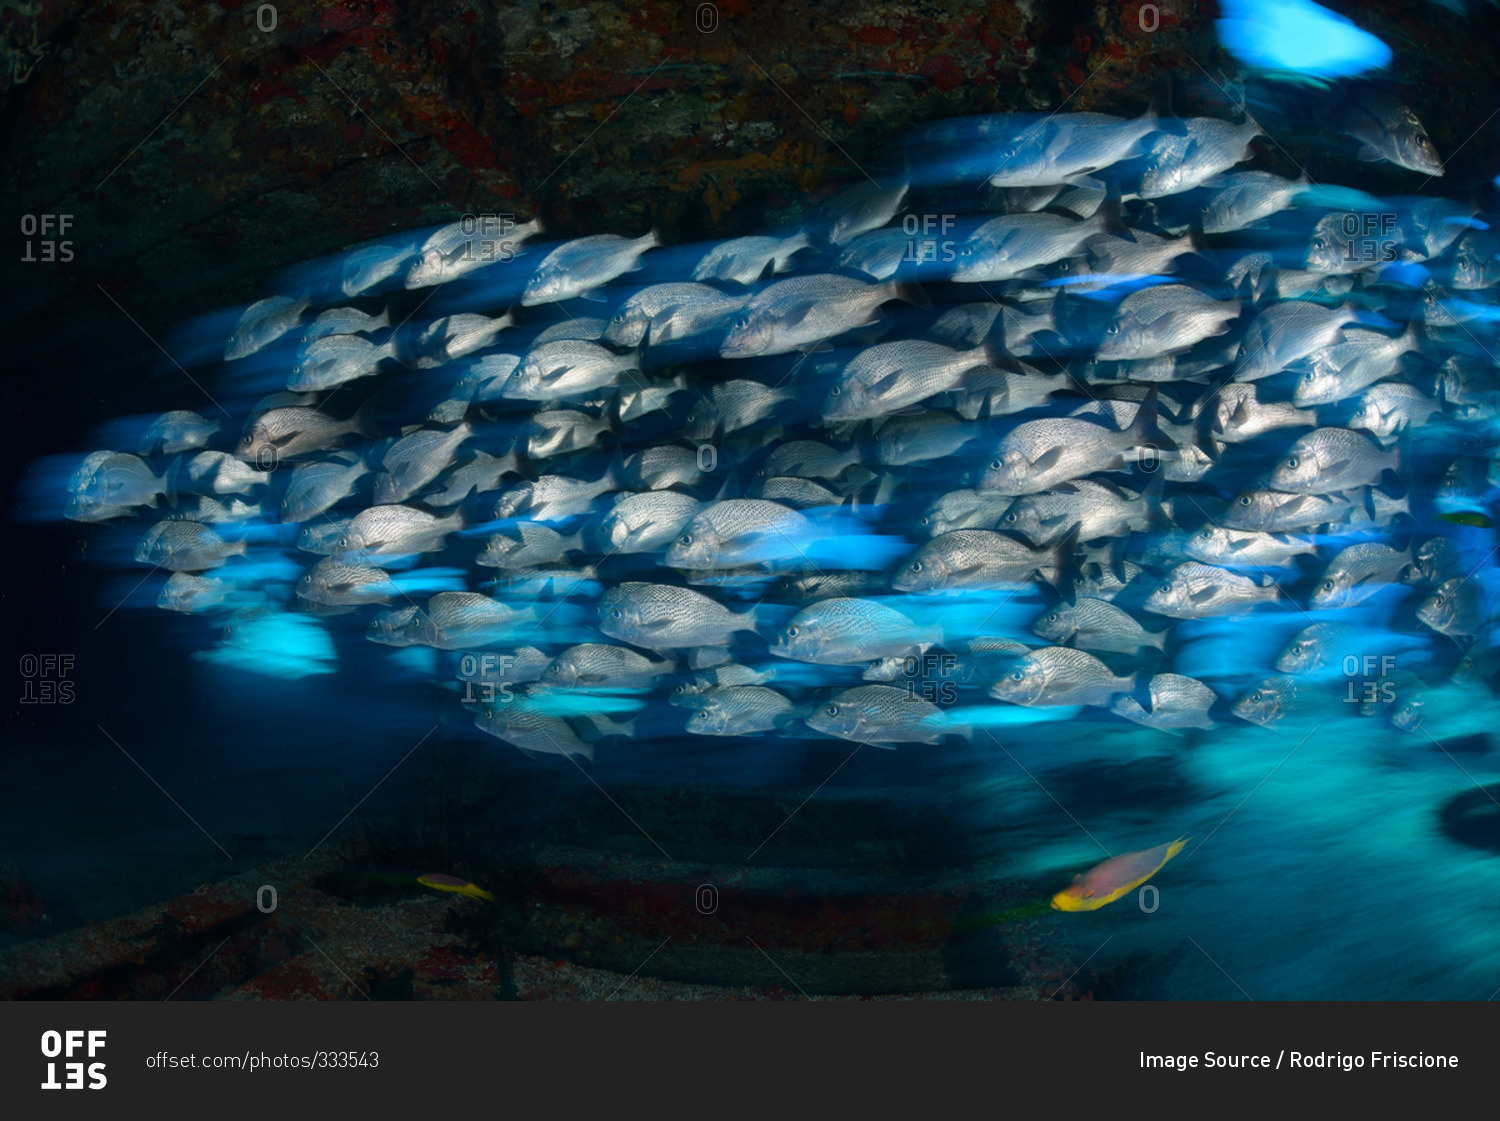 School of grunt snappers seeking shelter inside ship wreck, Quintana Roo, Mexico